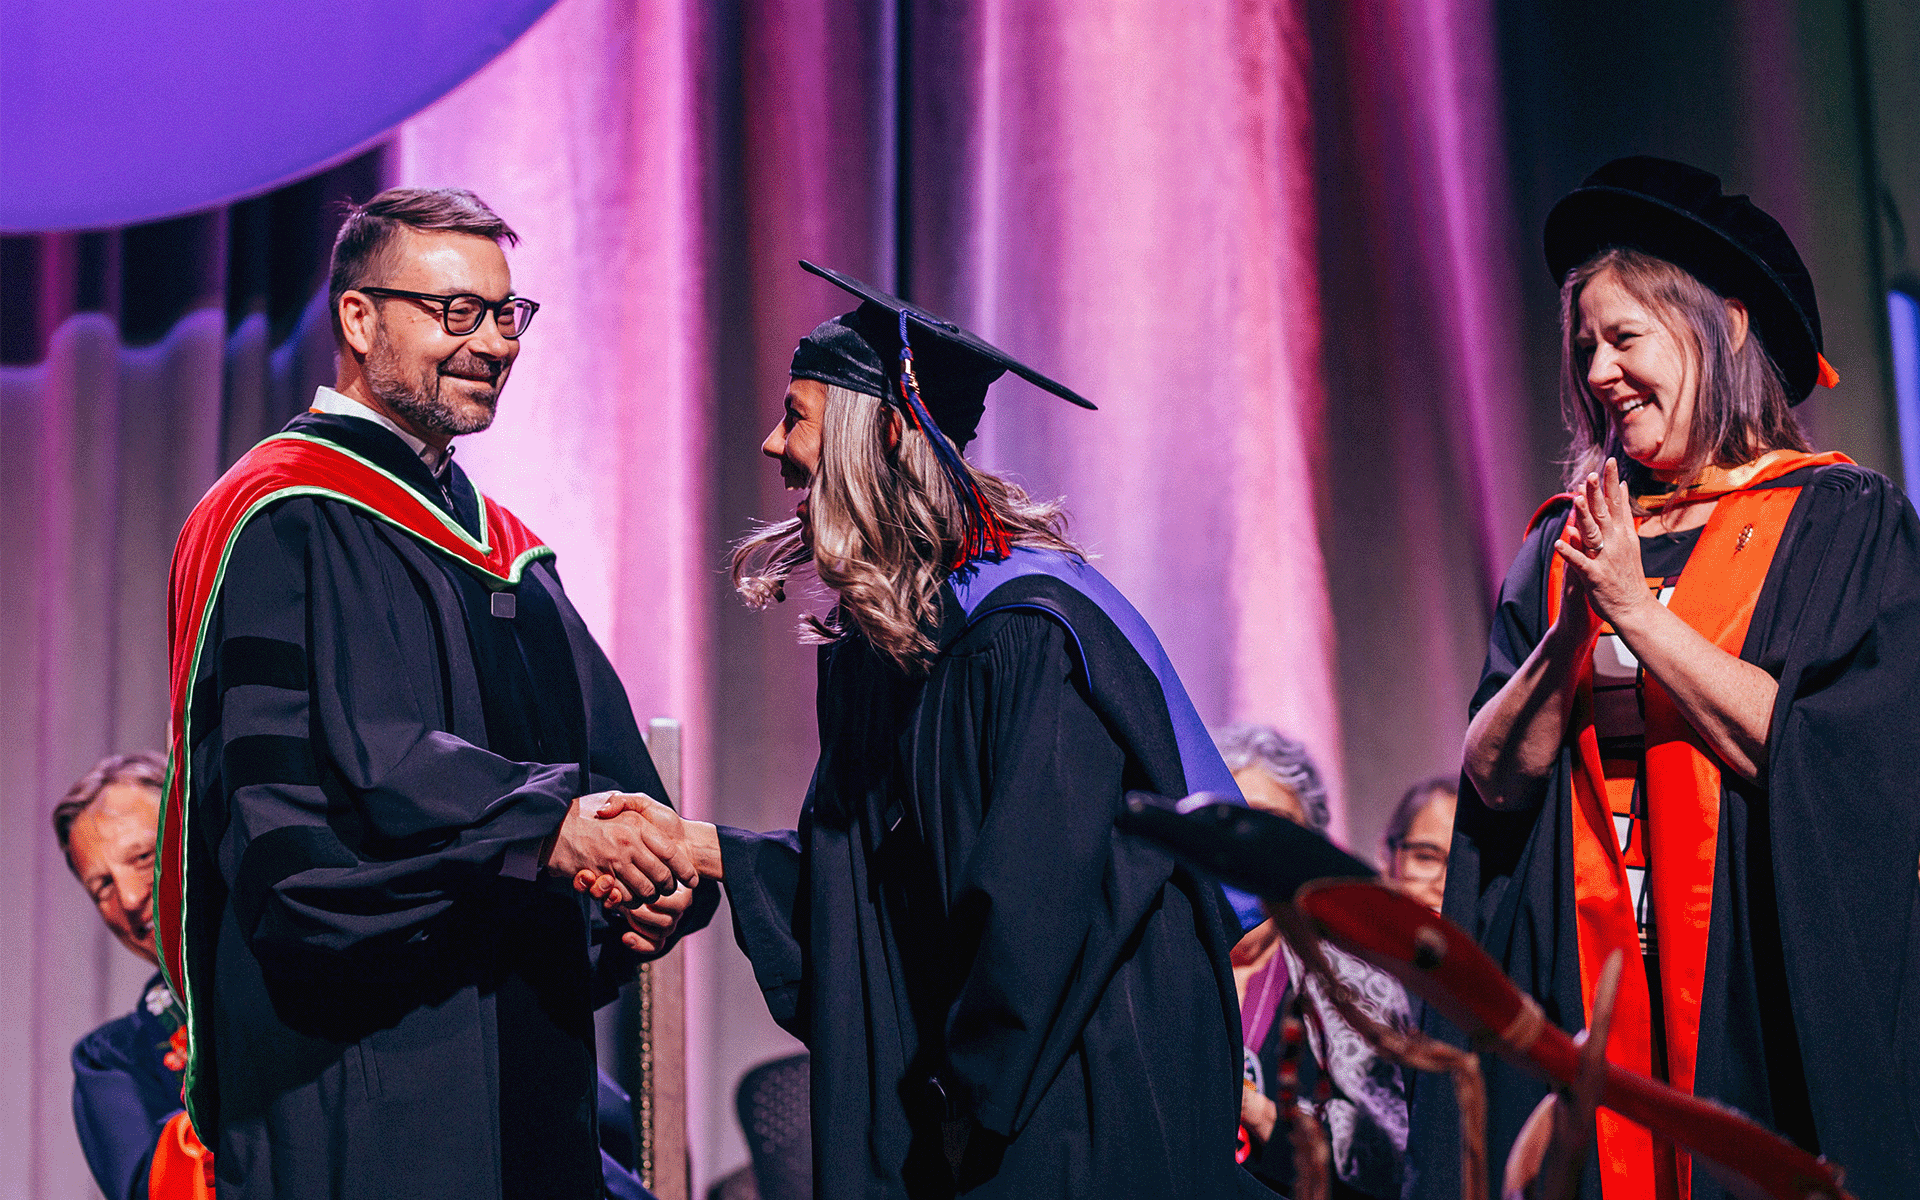 Graduate shaking hands with a dean during the convocation ceremony